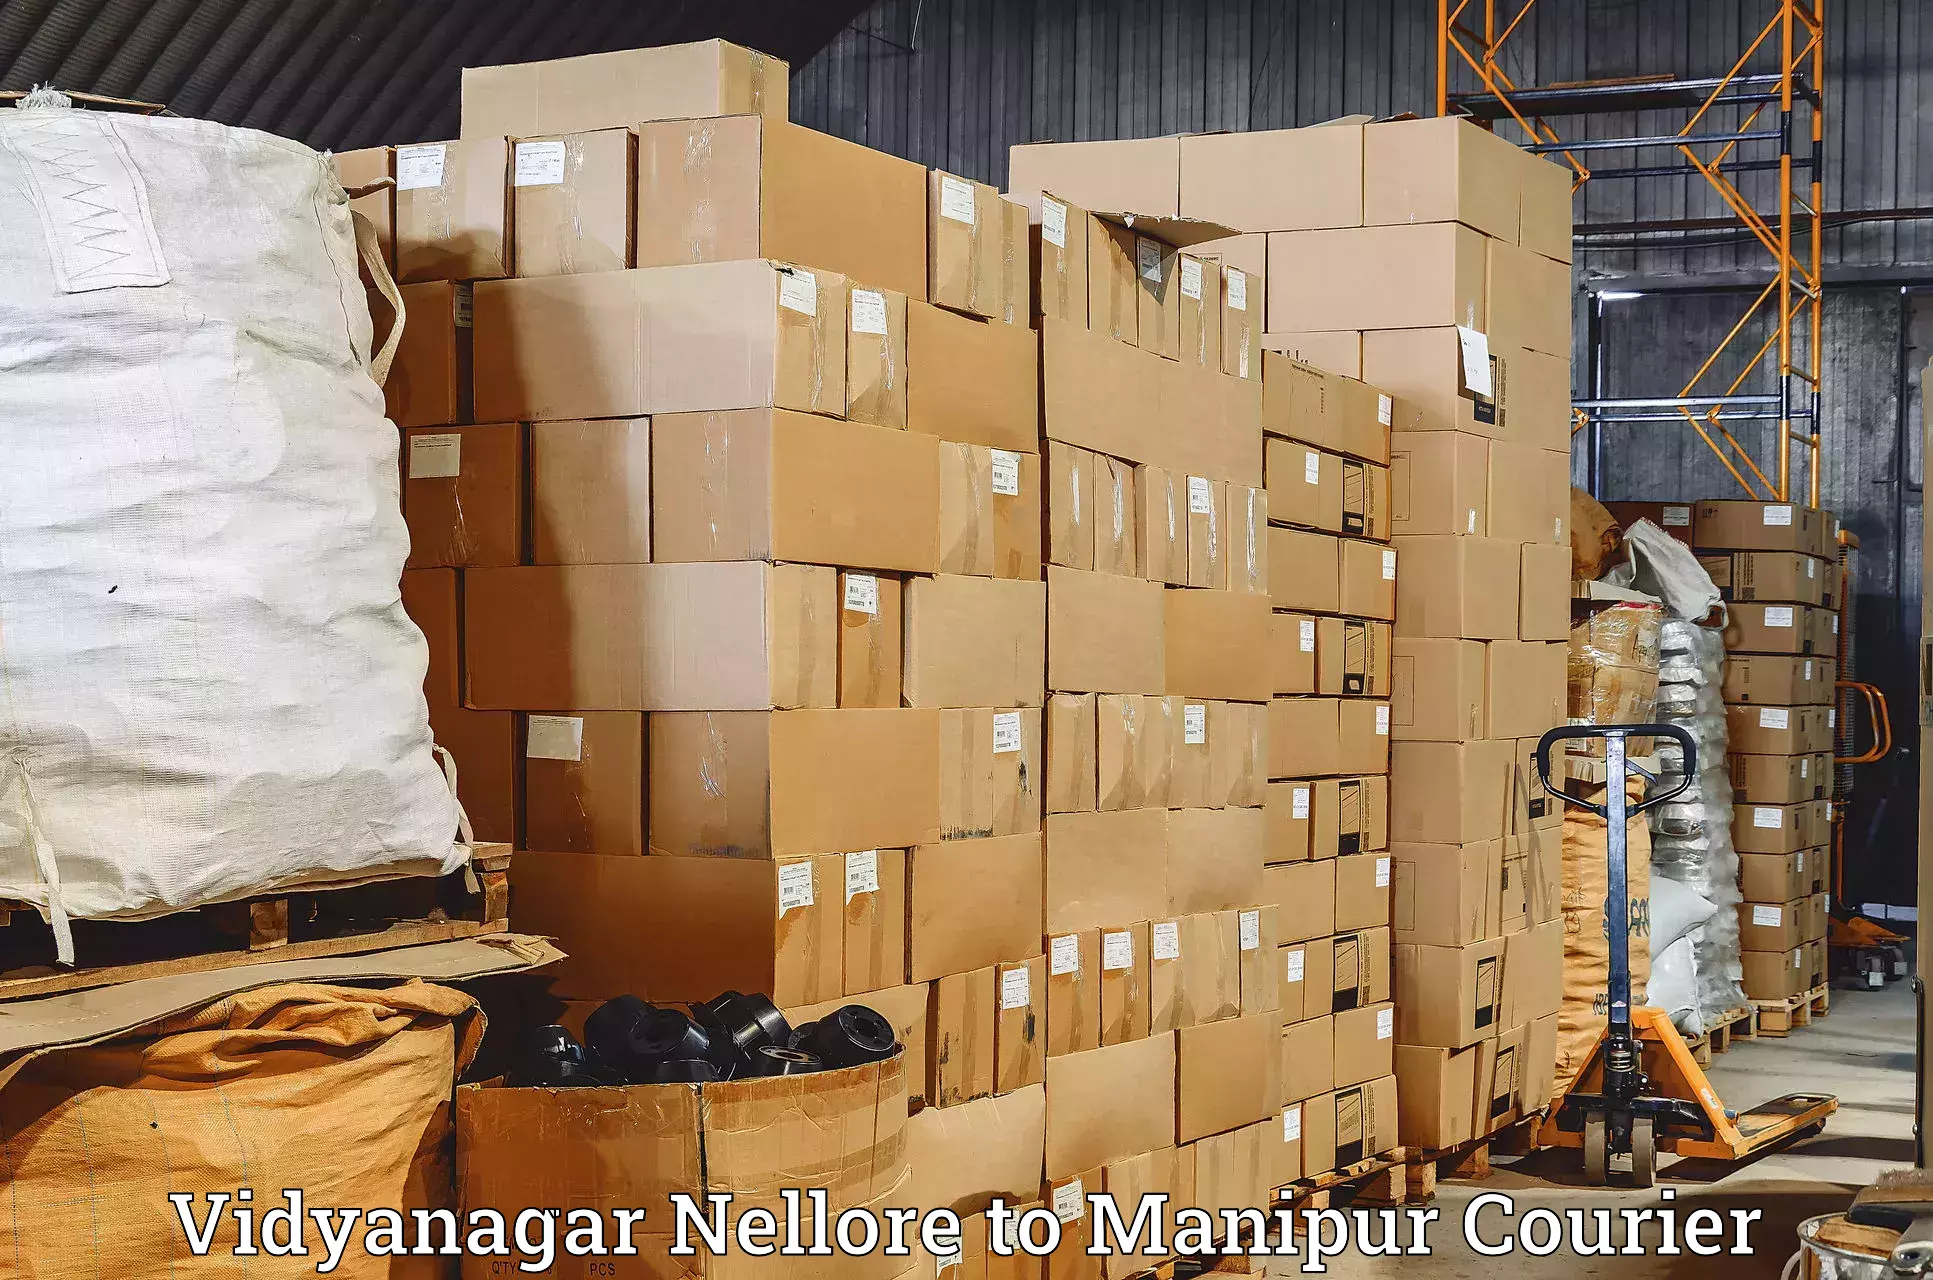 Parcel service for businesses in Vidyanagar Nellore to Manipur